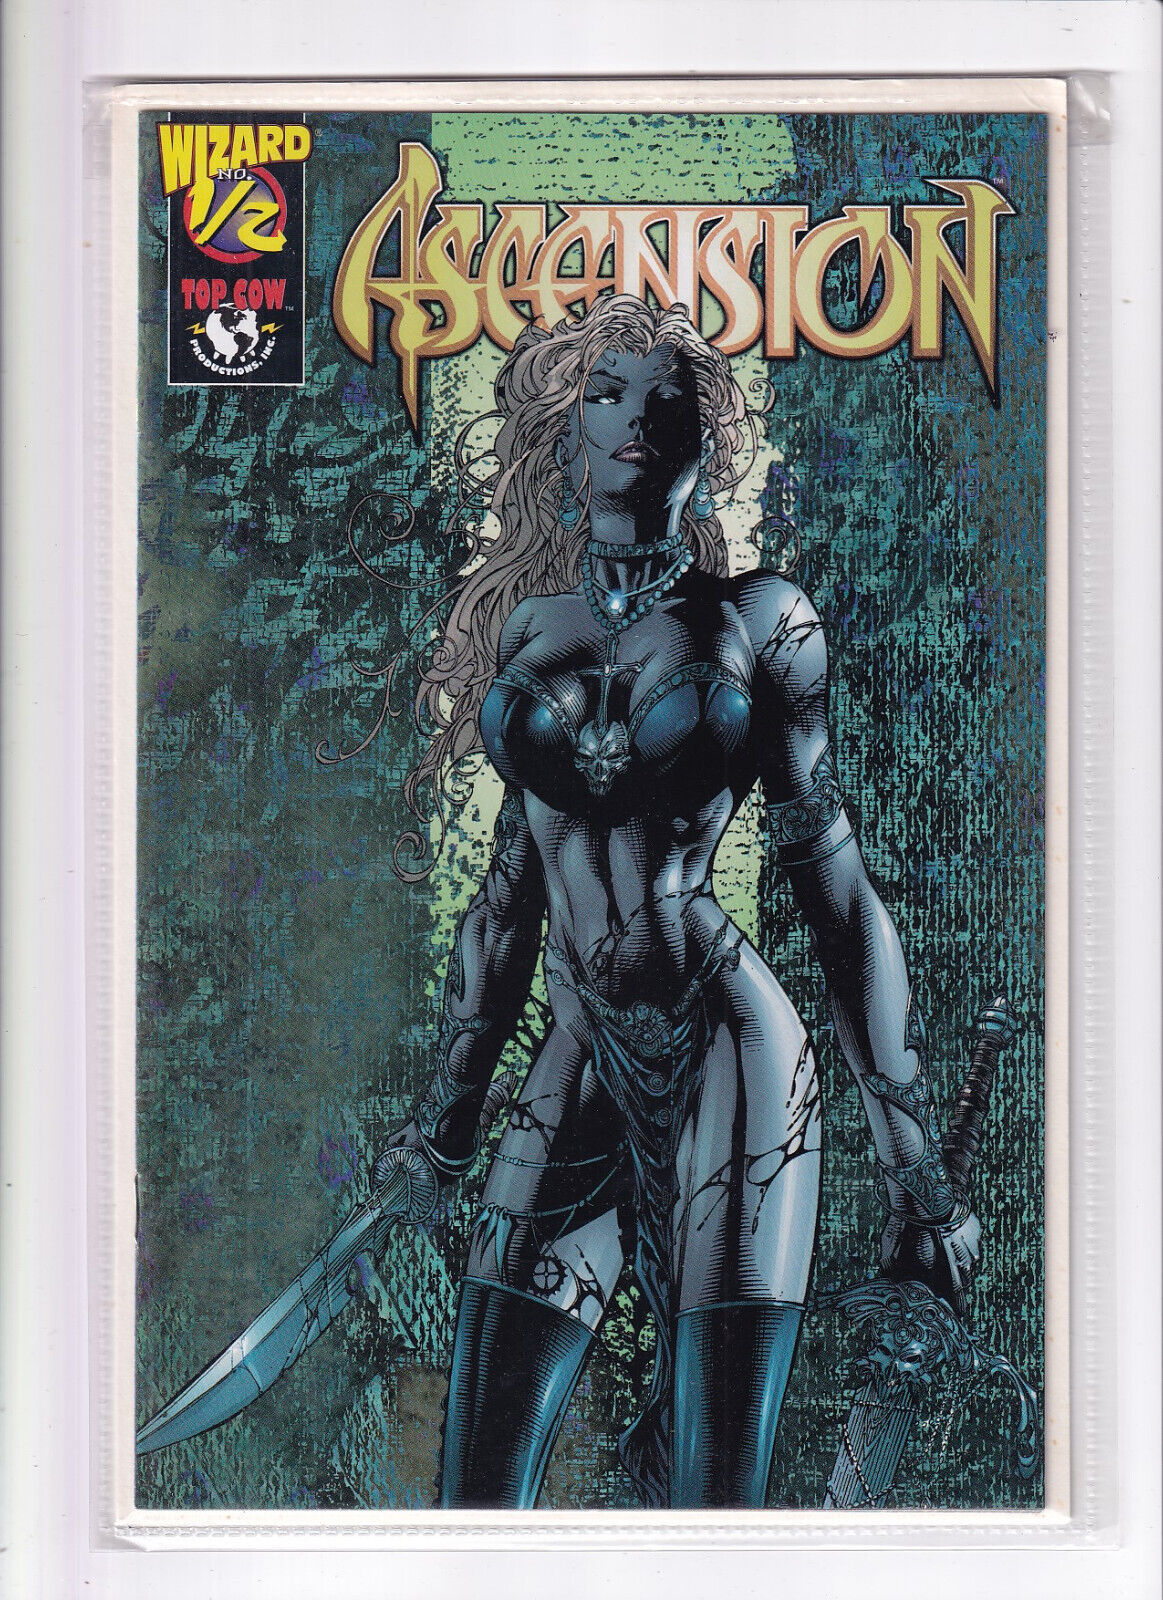 ASCENSION WIZARD 1/2 WITH COA TOP COW 1998 NM